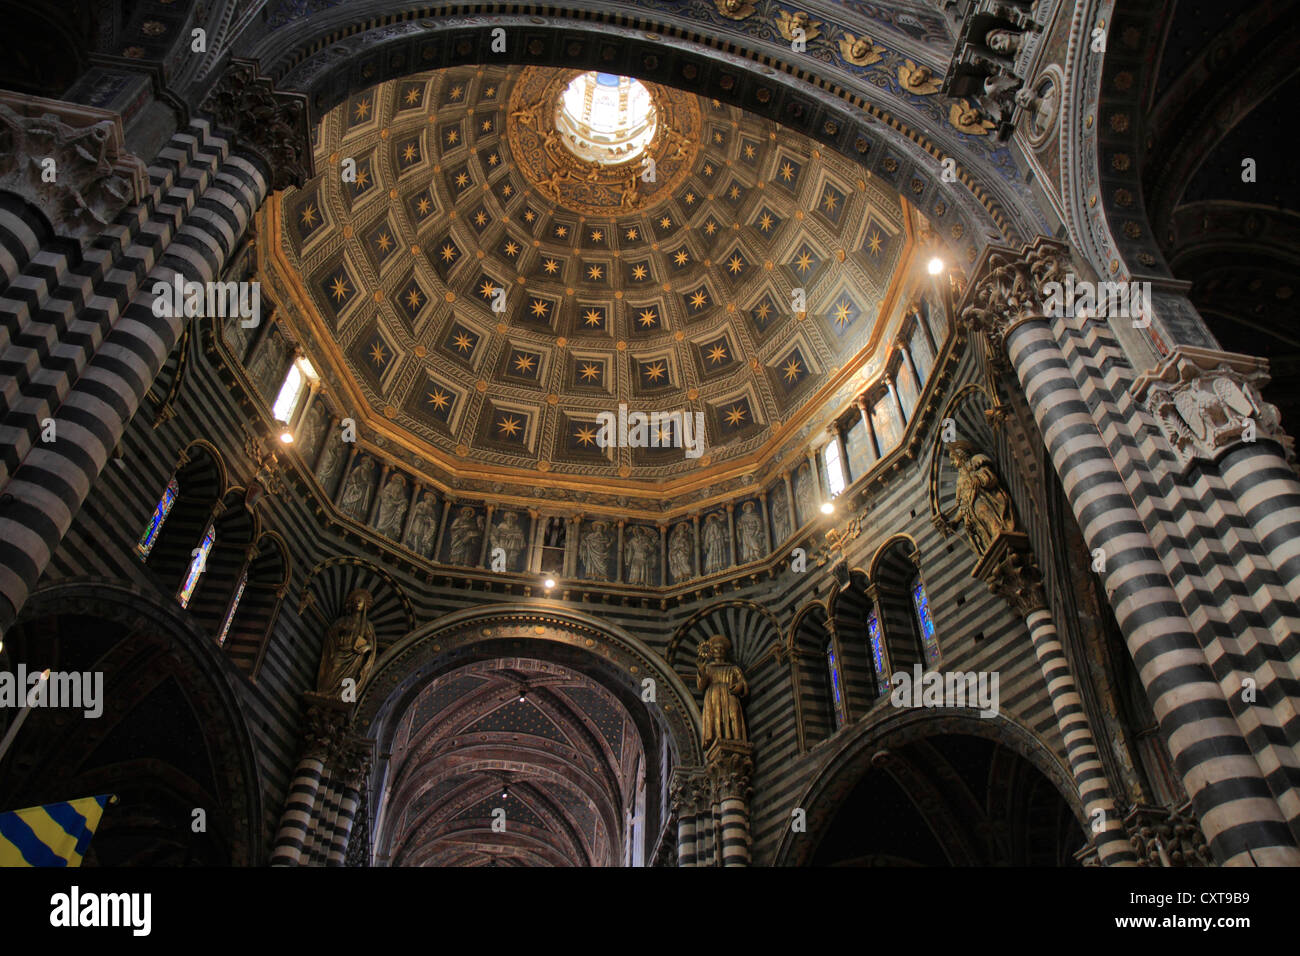 Dome of the transept, Siena Cathedral or Cathedral of Santa Maria Assunta, Siena, Tuscany, Italy, Europe Stock Photo